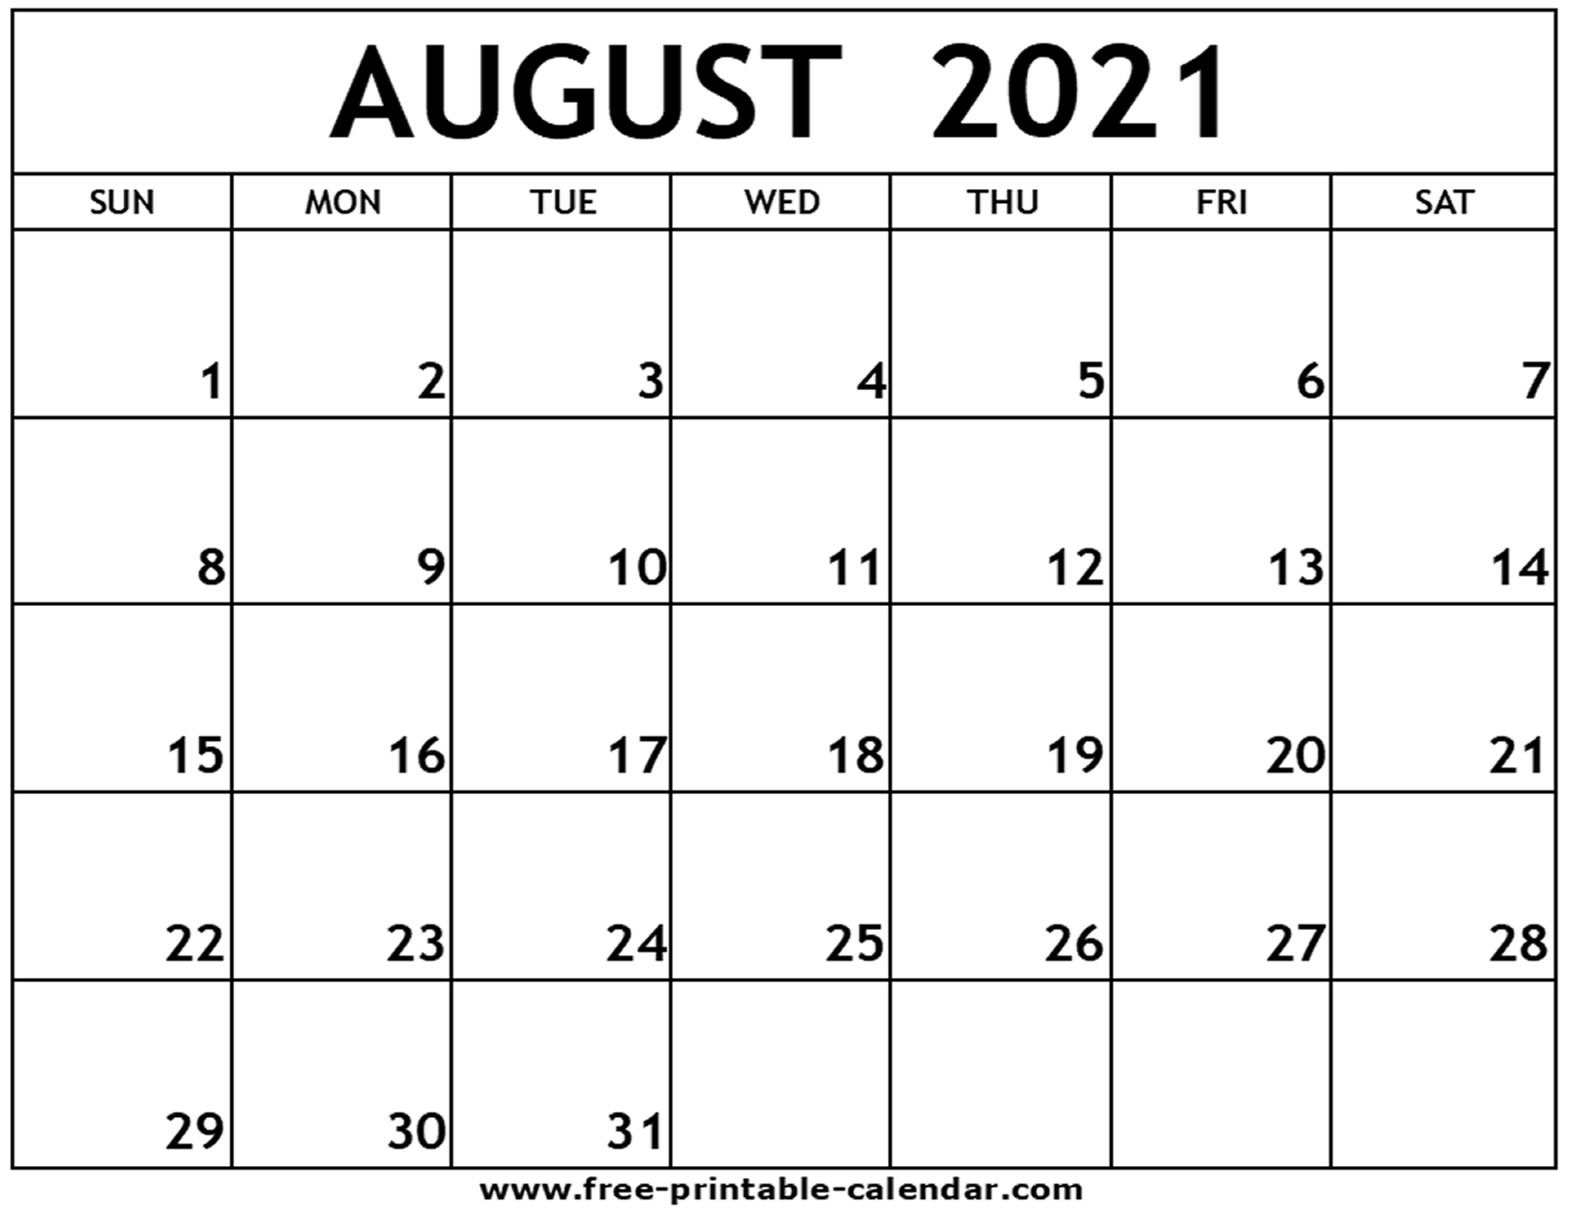 Collect August 2021 Printable Calendars